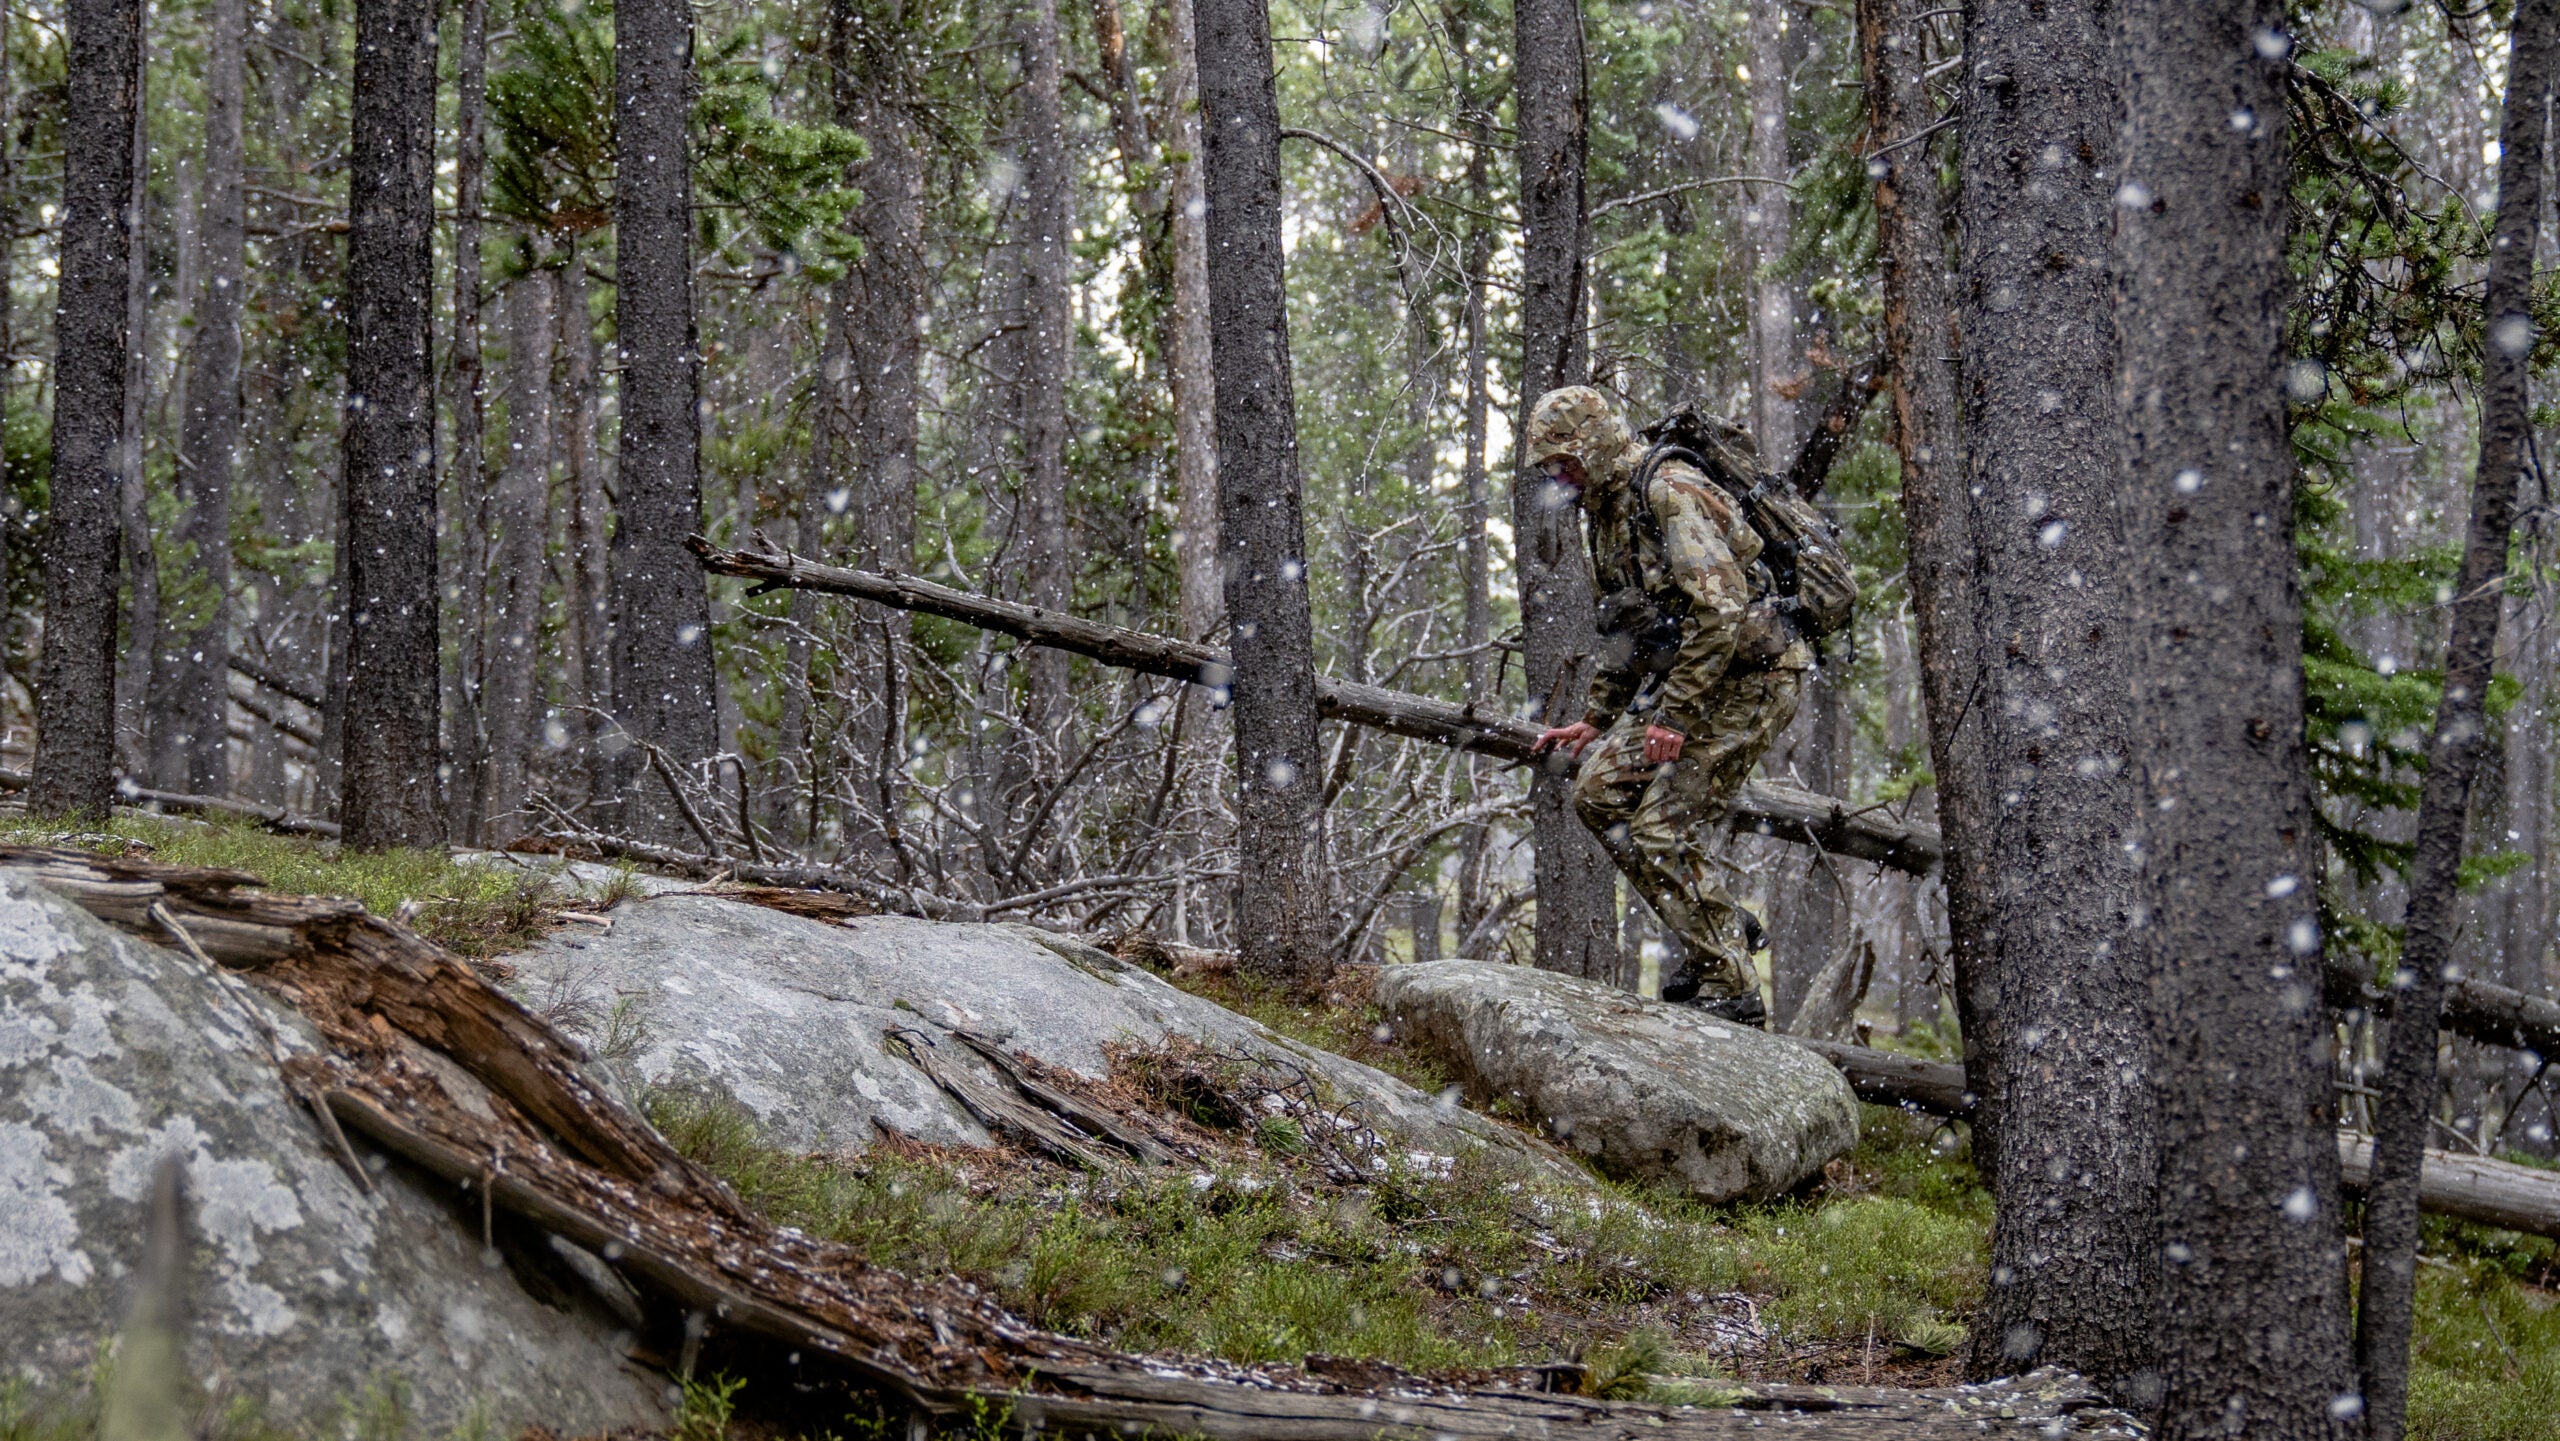 Tested: Kuiu’s New Women’s Hunting Clothing Line